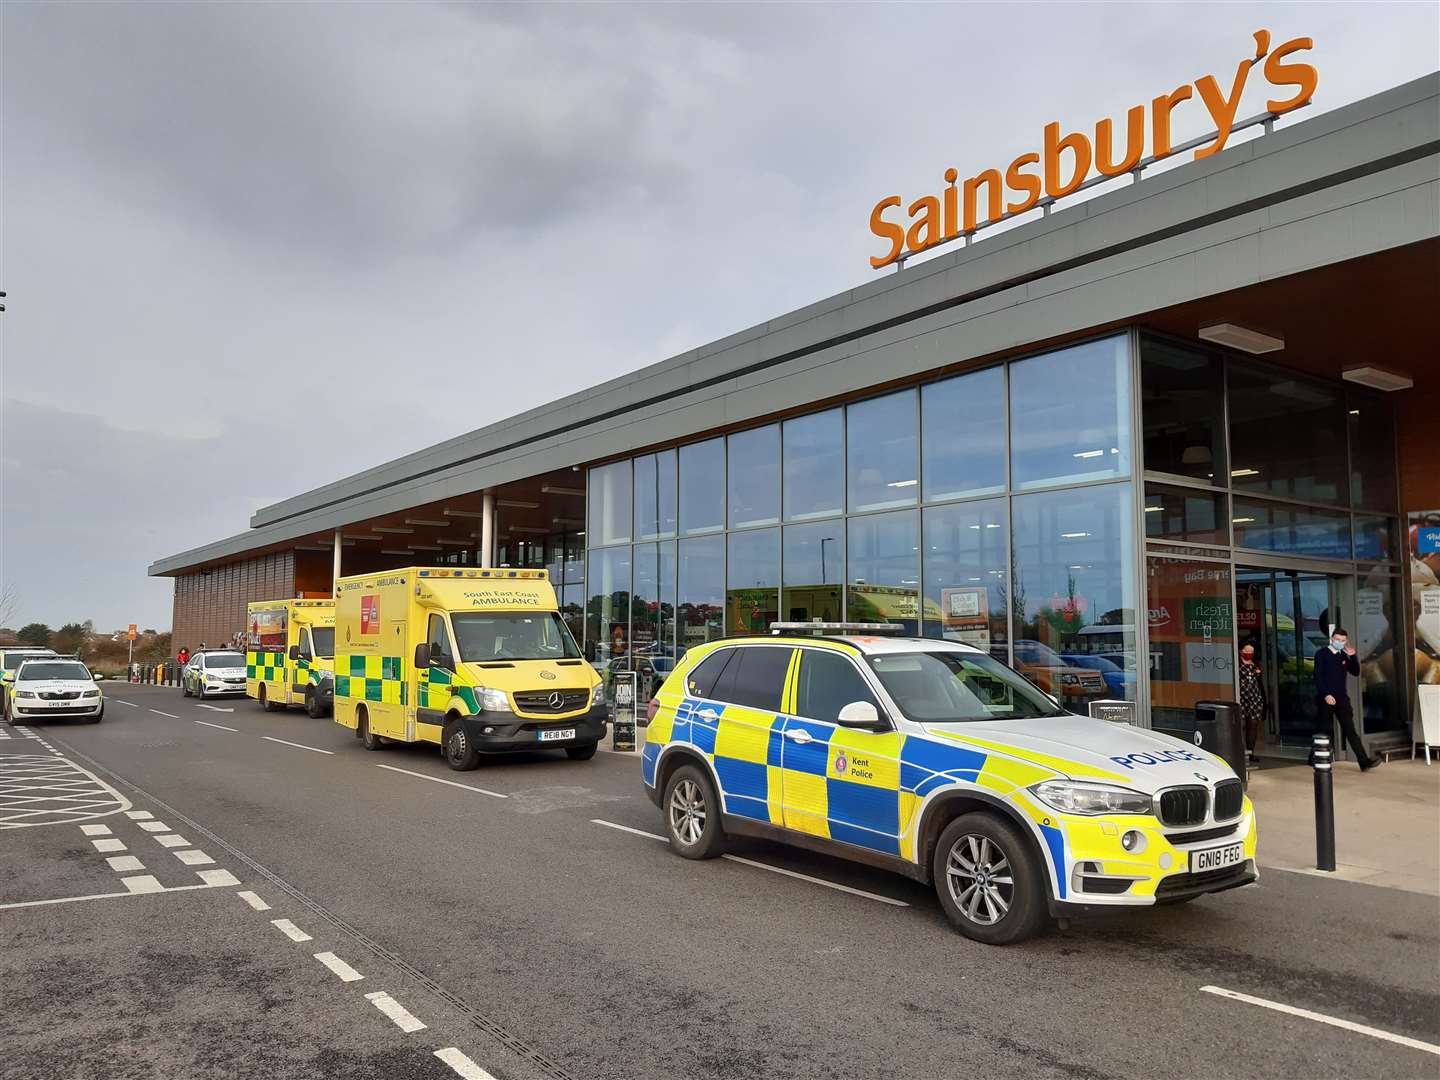 Paramedics, police and an air ambulance descended on the store just before 12.15pm on Saturday